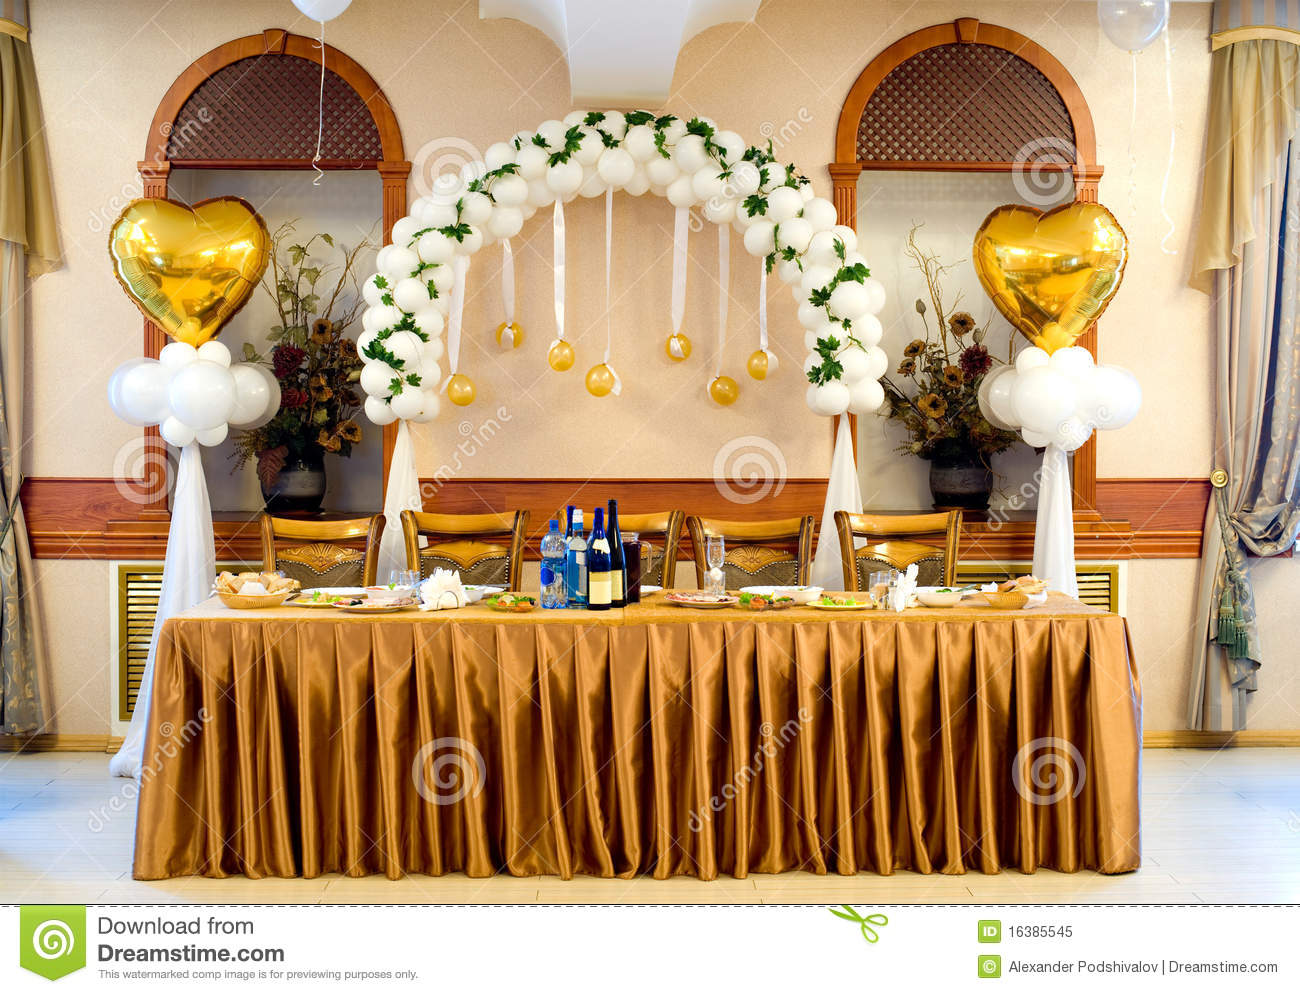 Wedding Banquet Table Royalty Free Stock Photo   Image  16385545